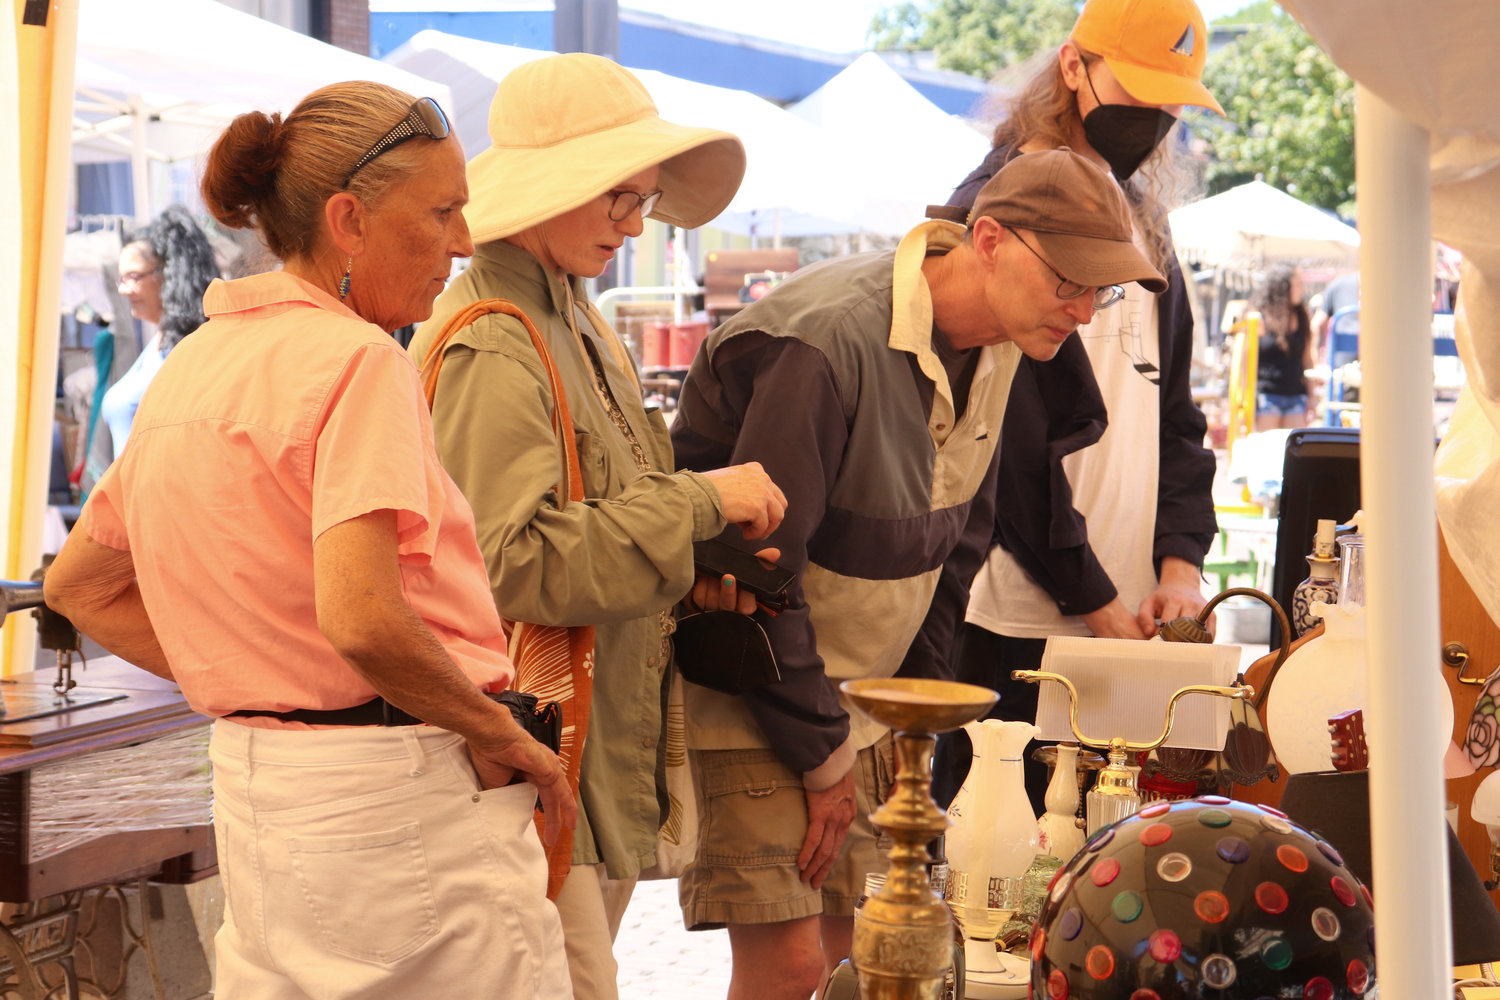 Marie Christensen, left, talks with perusing customers in her tent at Antique Fest in downtown Centralia on Sunday.